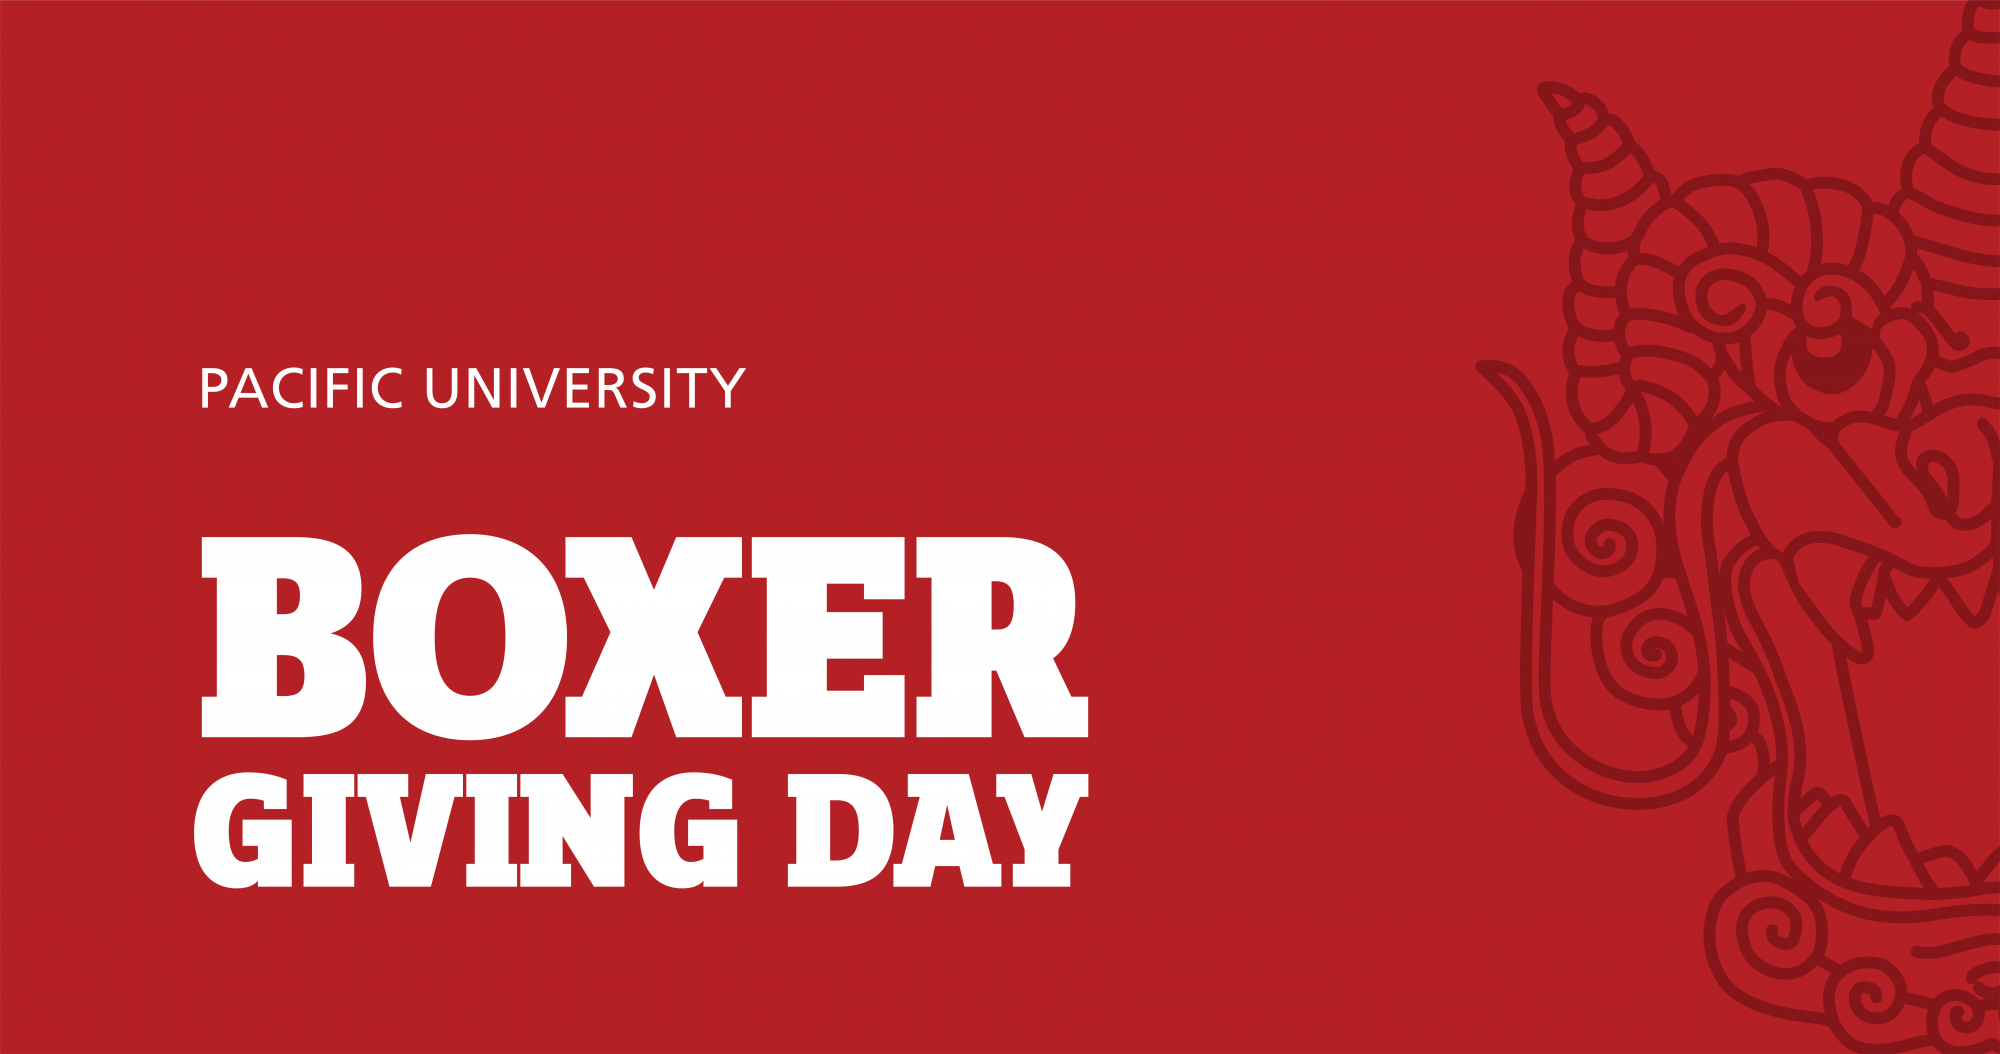 Boxer Giving Day written in white text on a red background